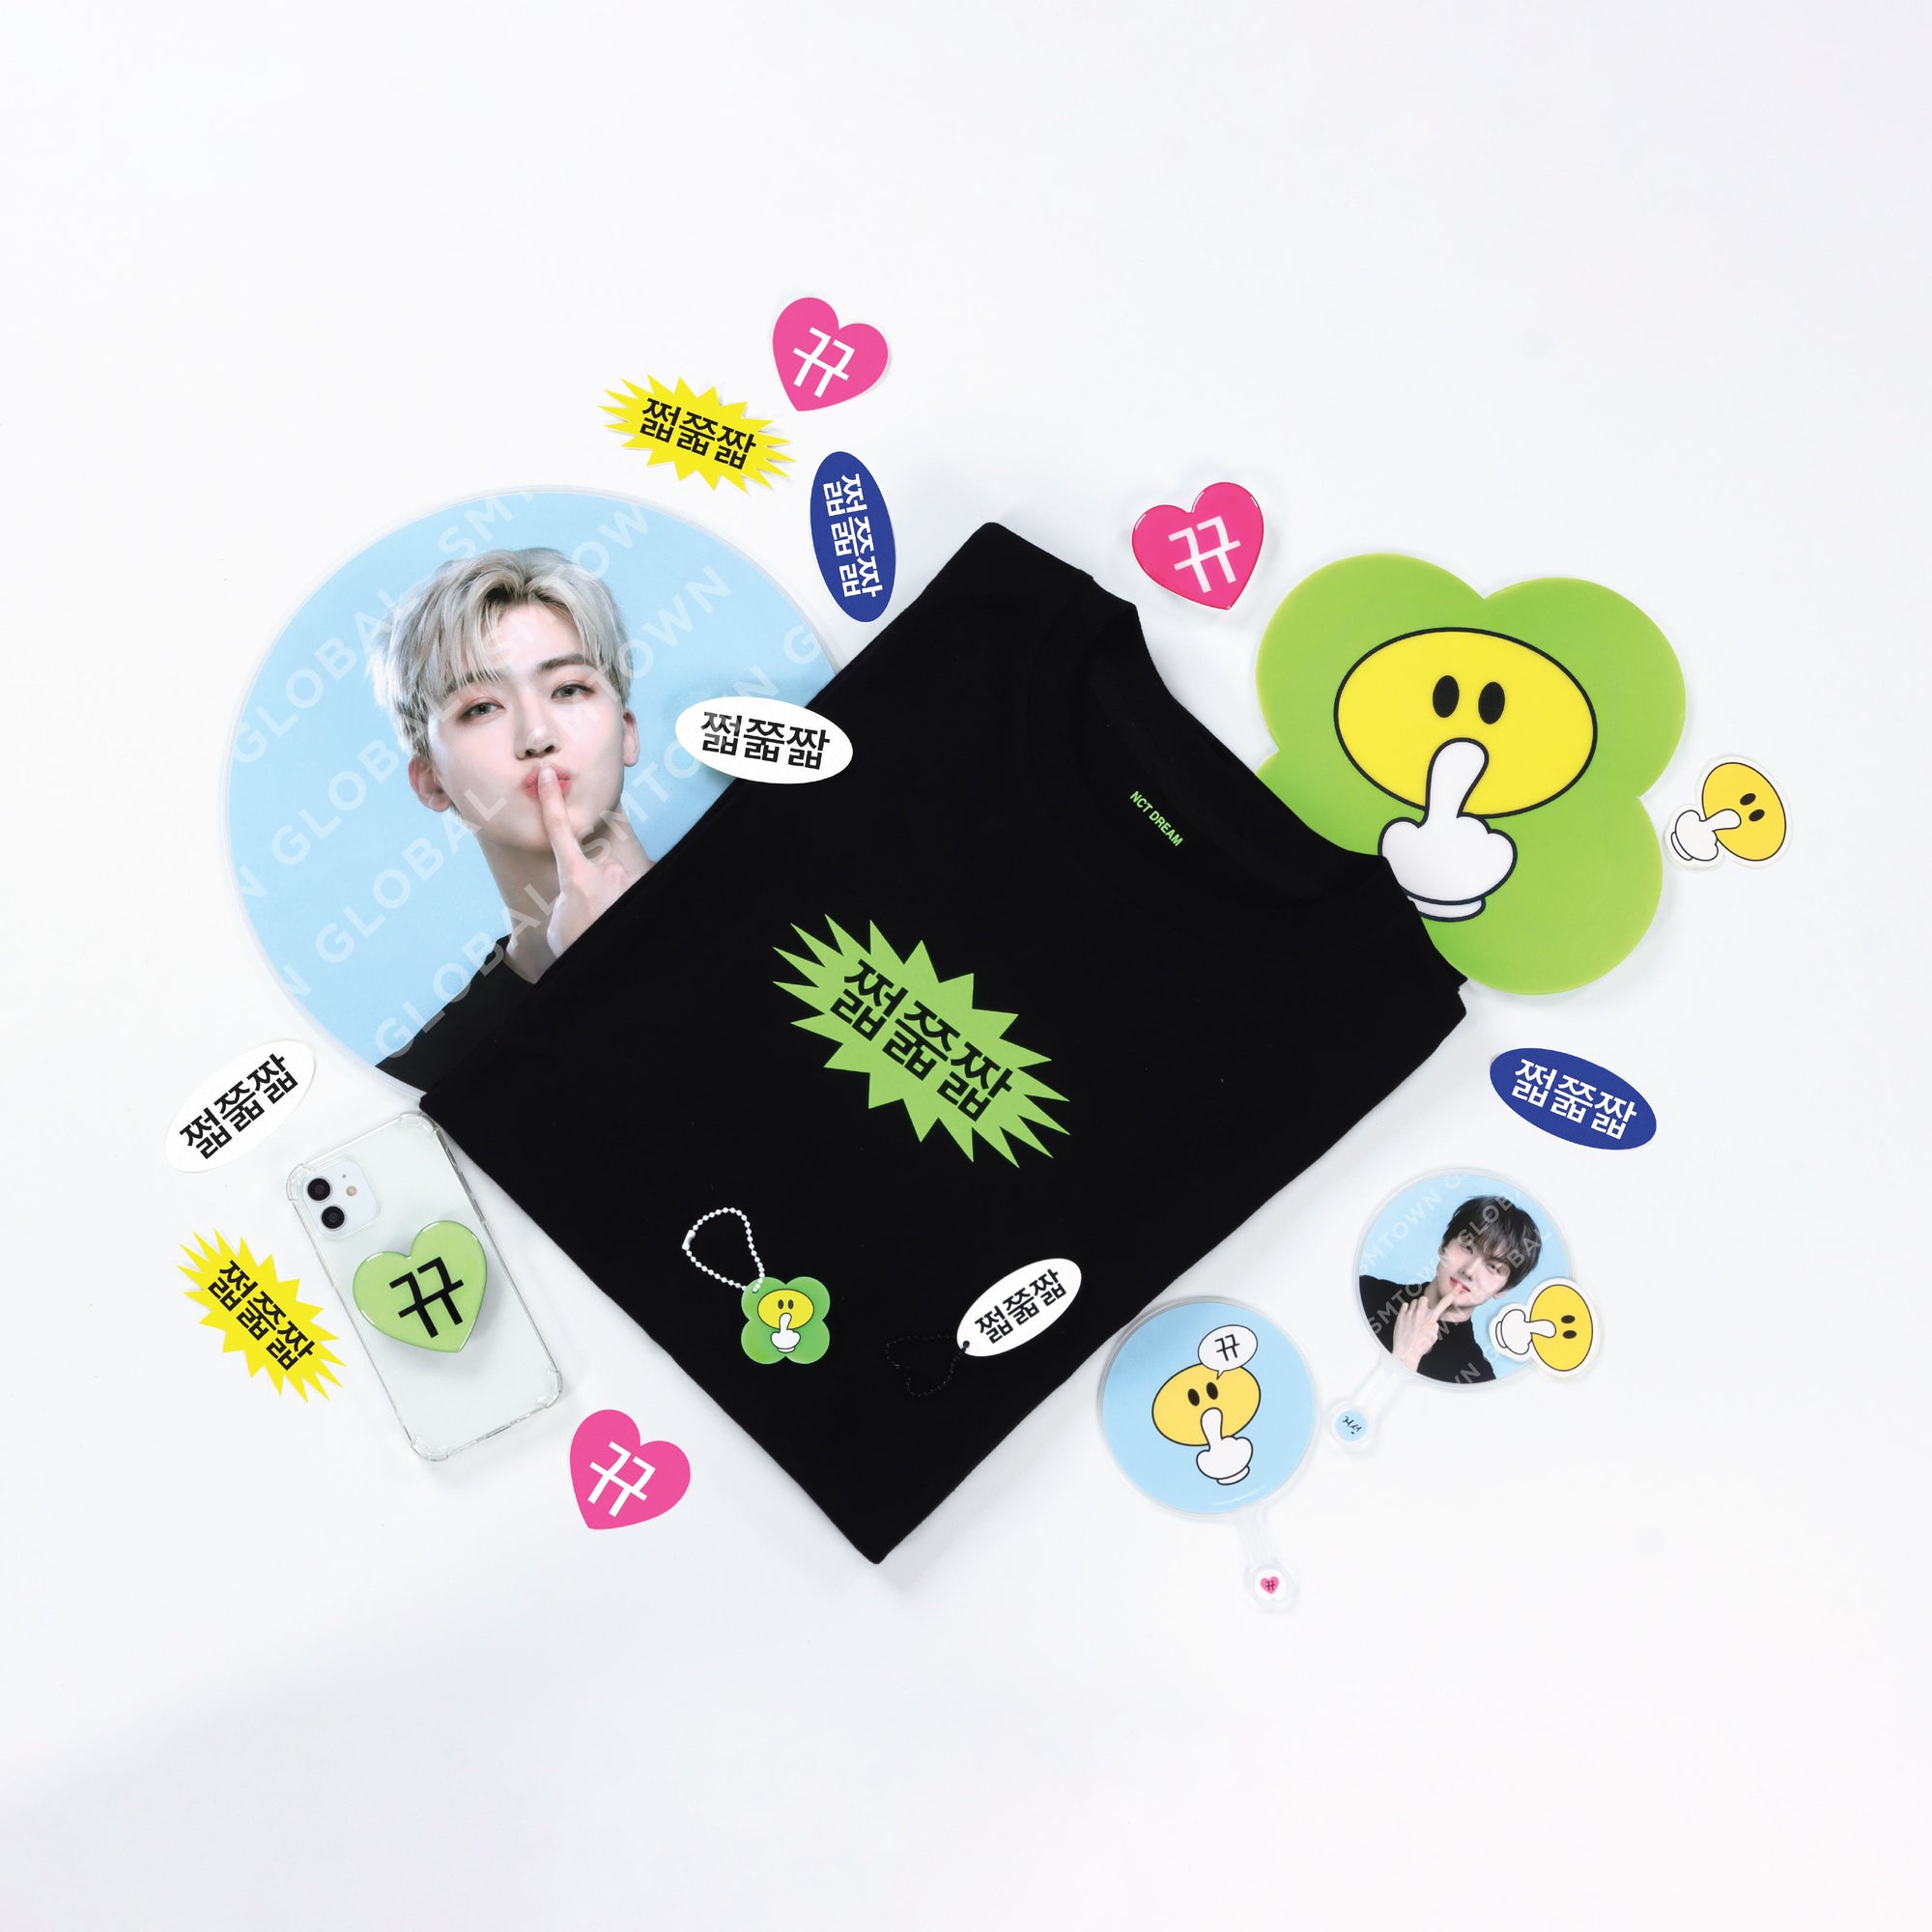 NCT DREAM 'DREAM( )SCAPE ZONE' POP-UP MD IMAGE PICKET SET – Kpop Omo